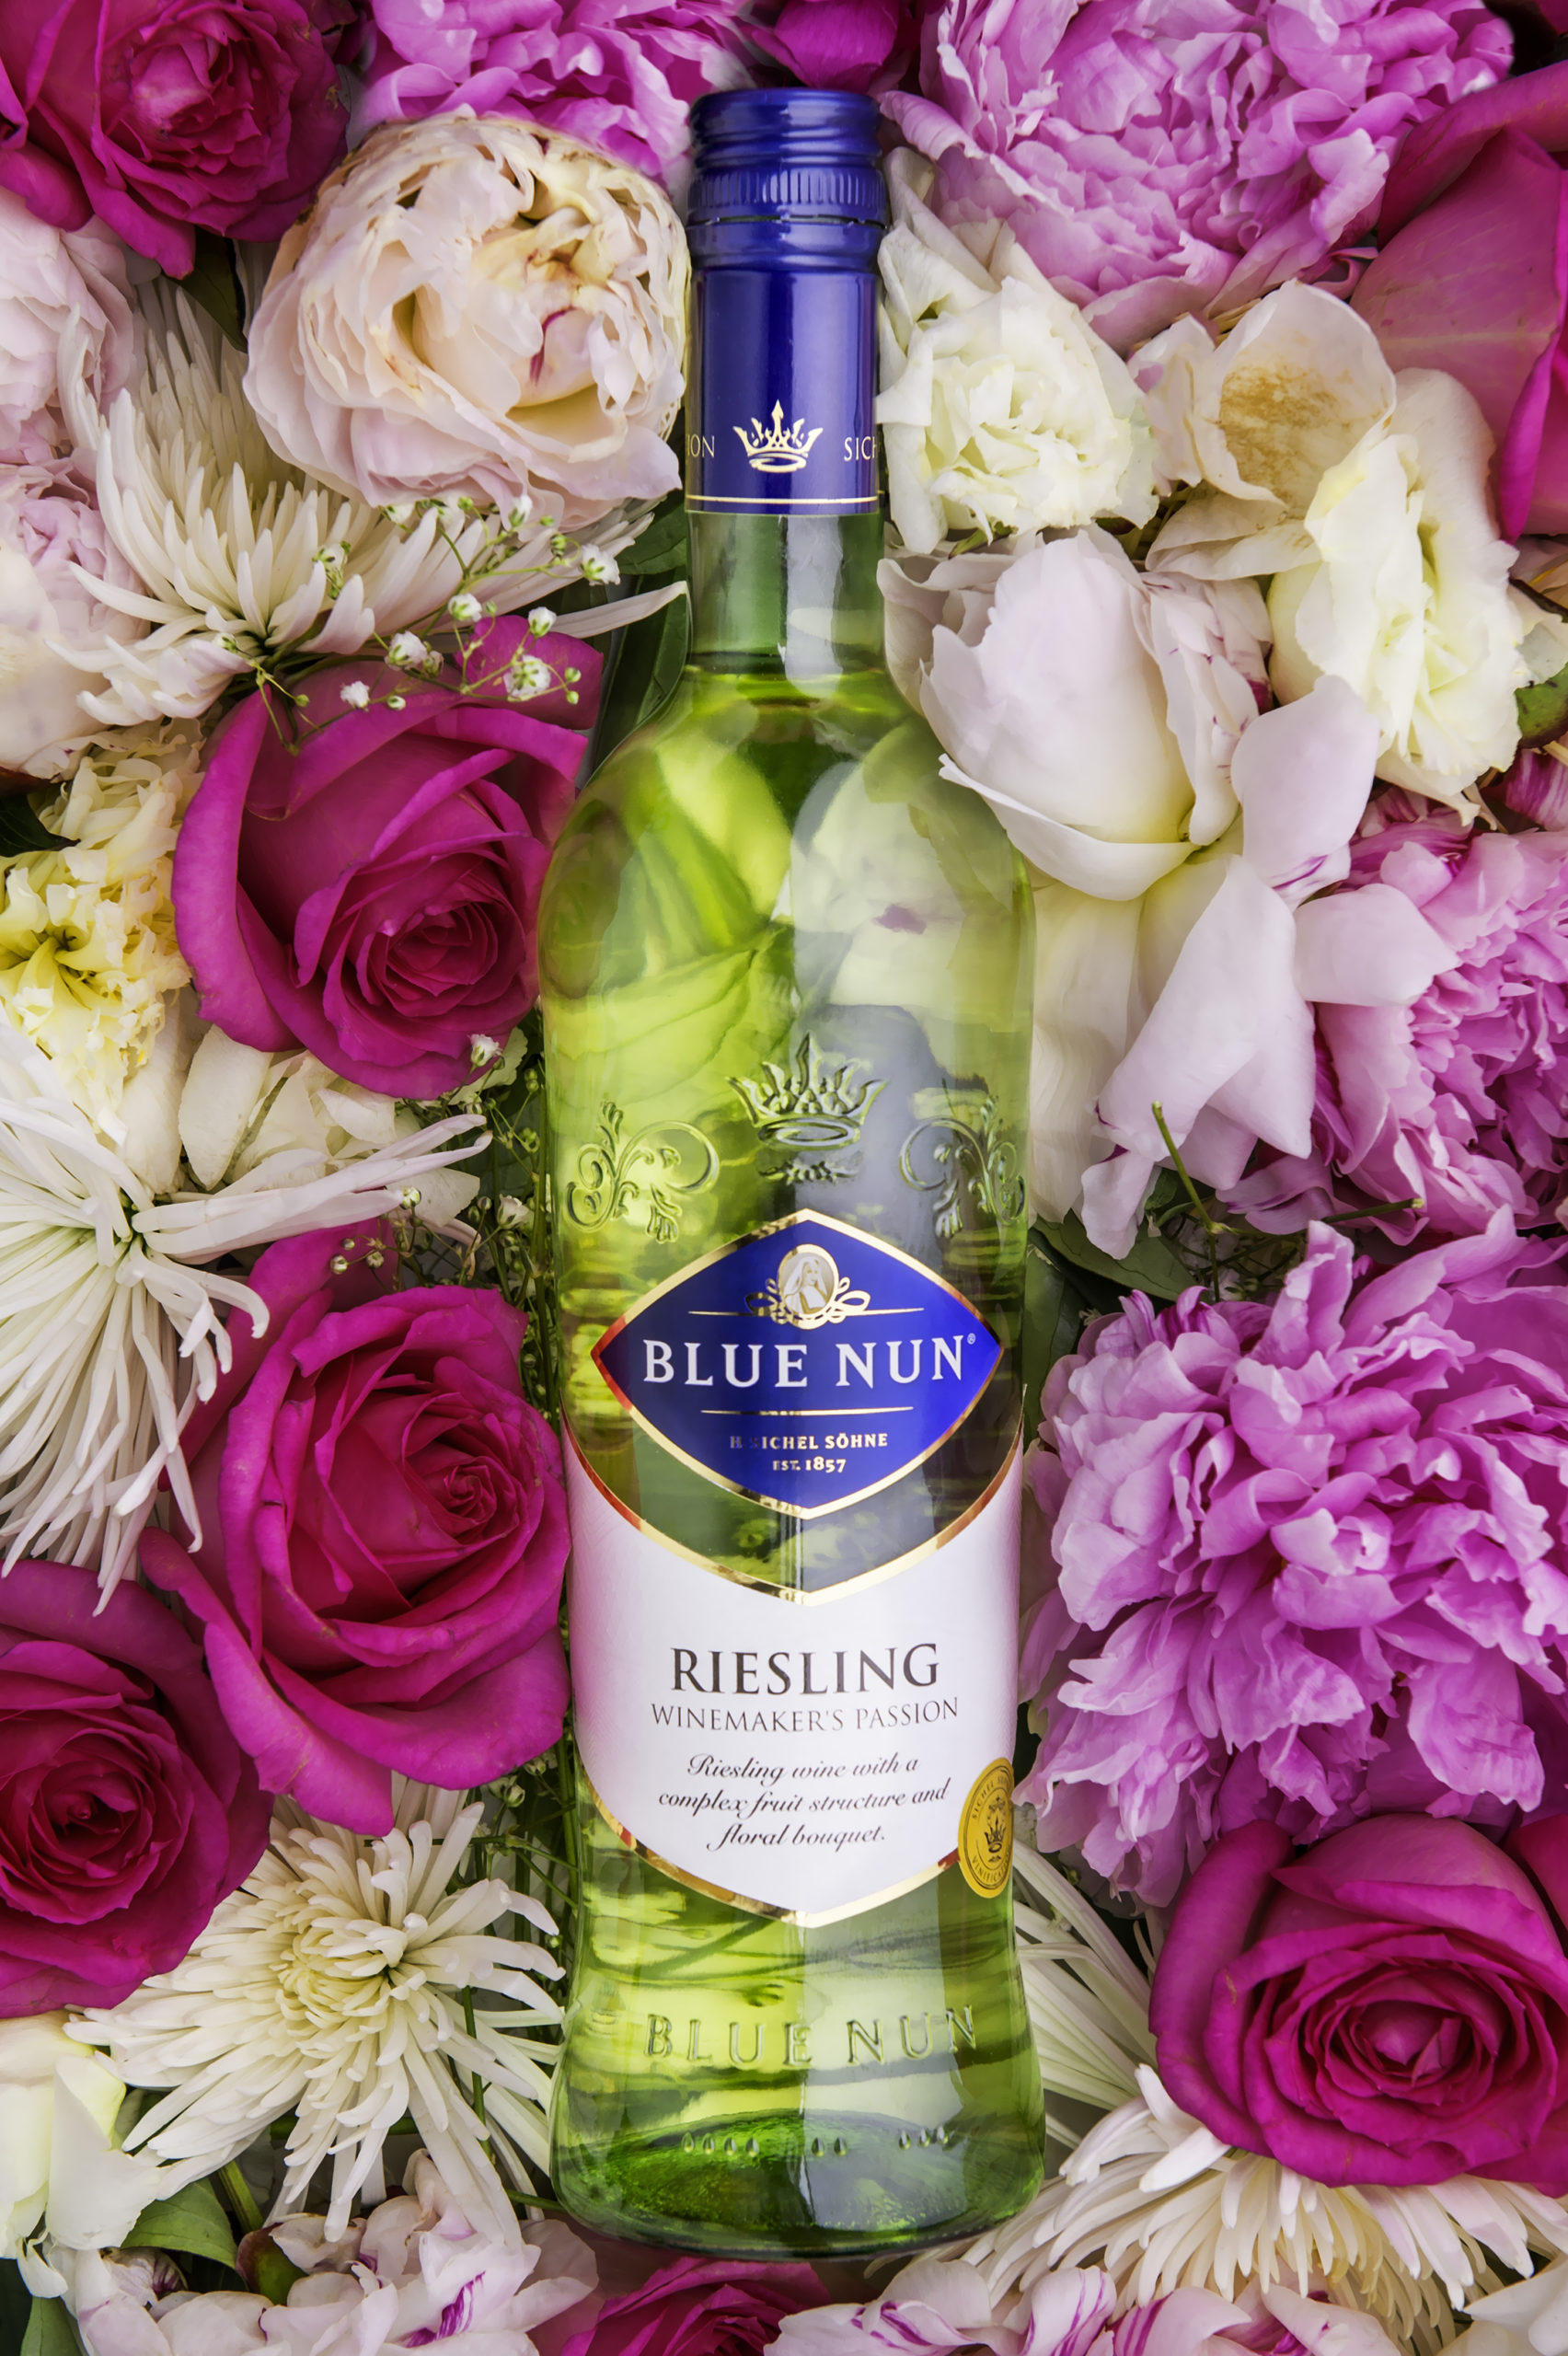 Bottle of Riesling wine on display with various flowers in the background